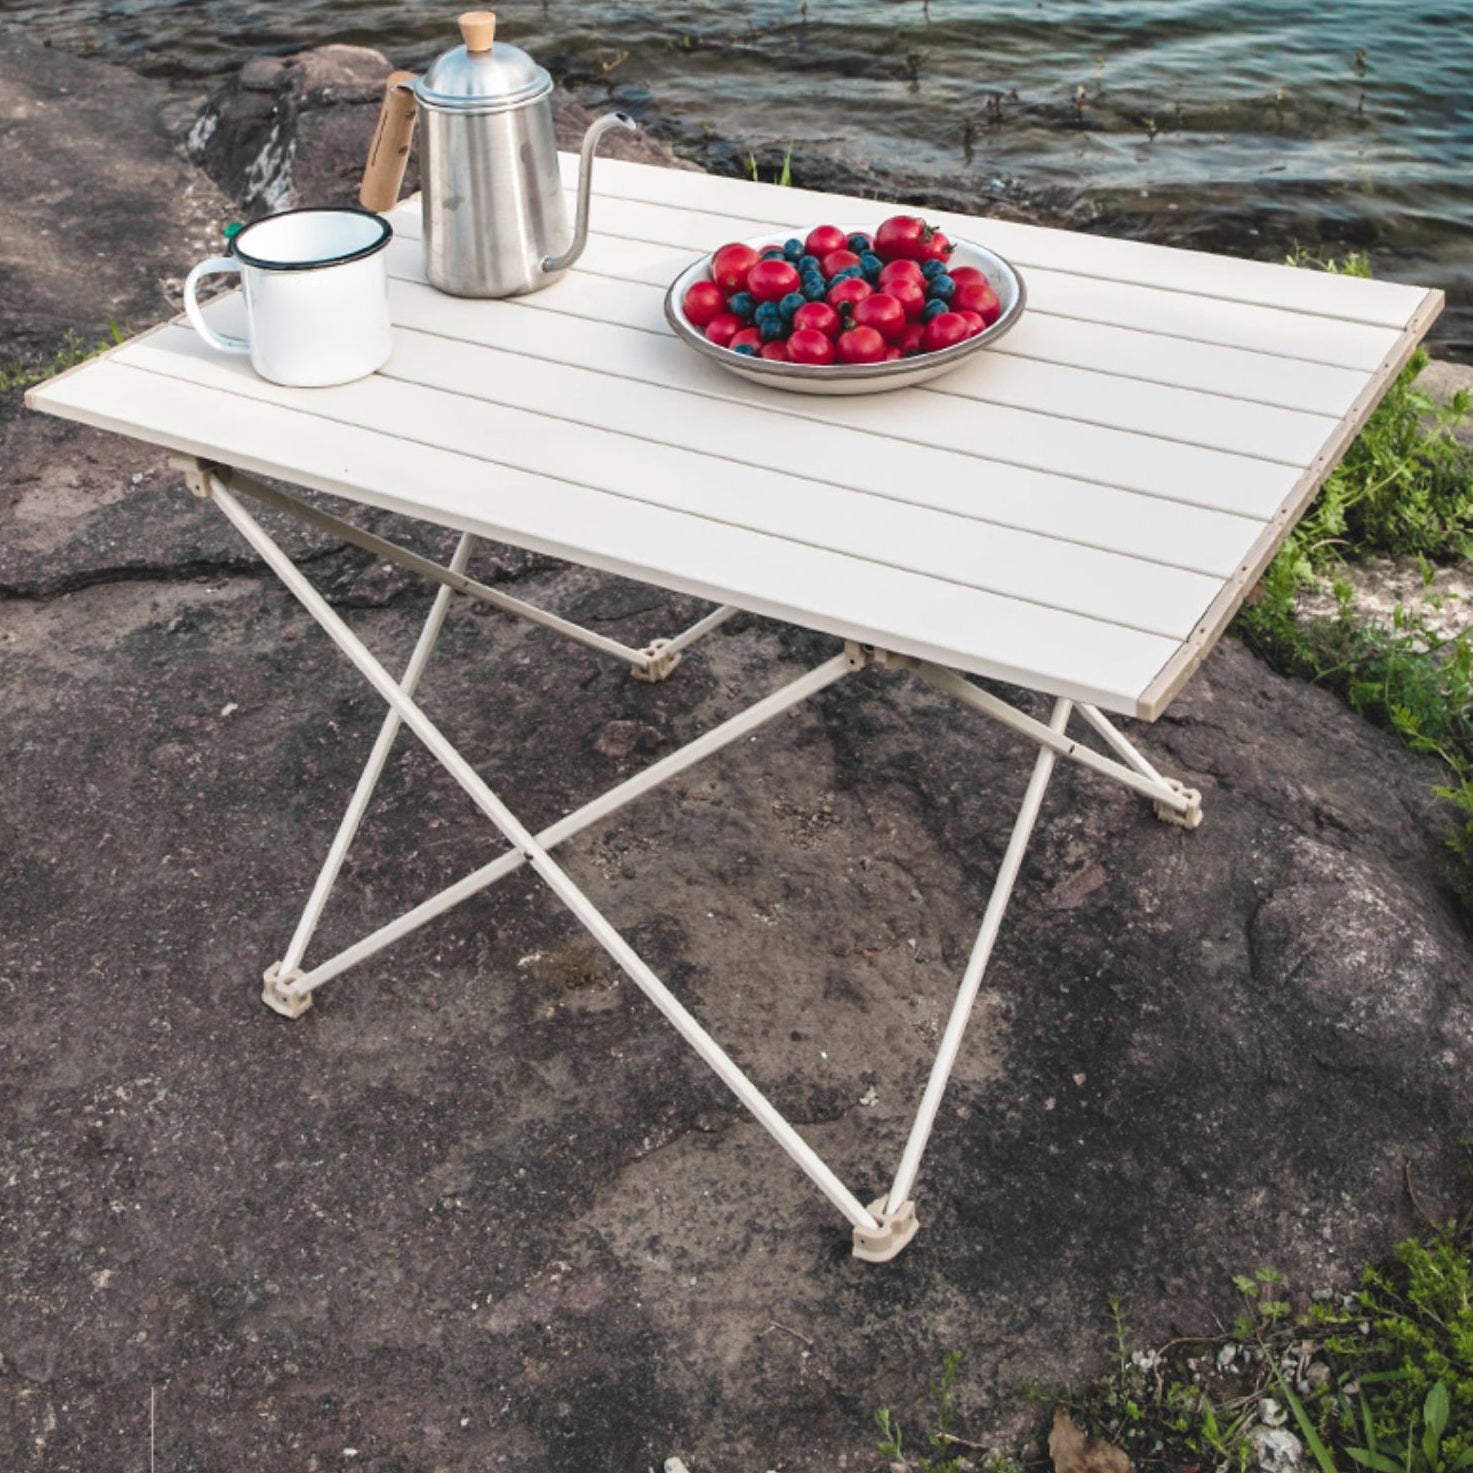 Industrial Outdoor Folding Table Rectangle Aluminum Camping Table